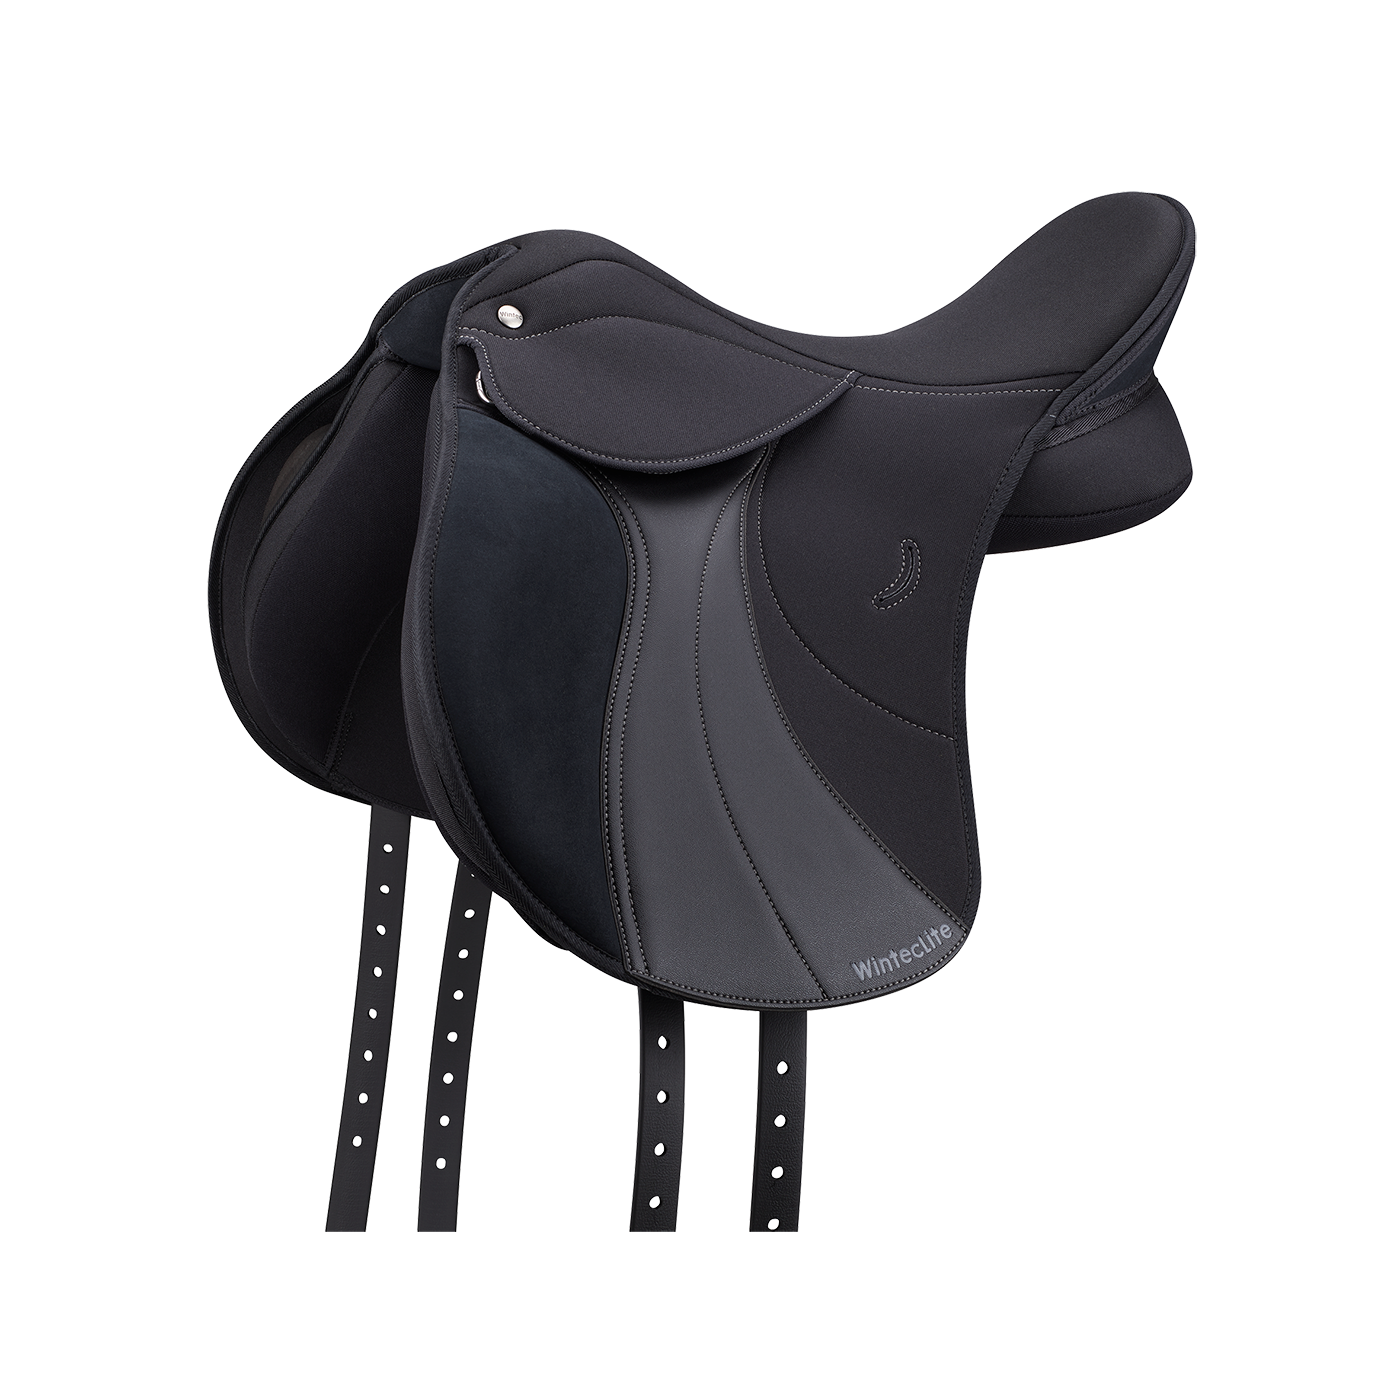 WintecLite Pony All Purpose Saddle with HART